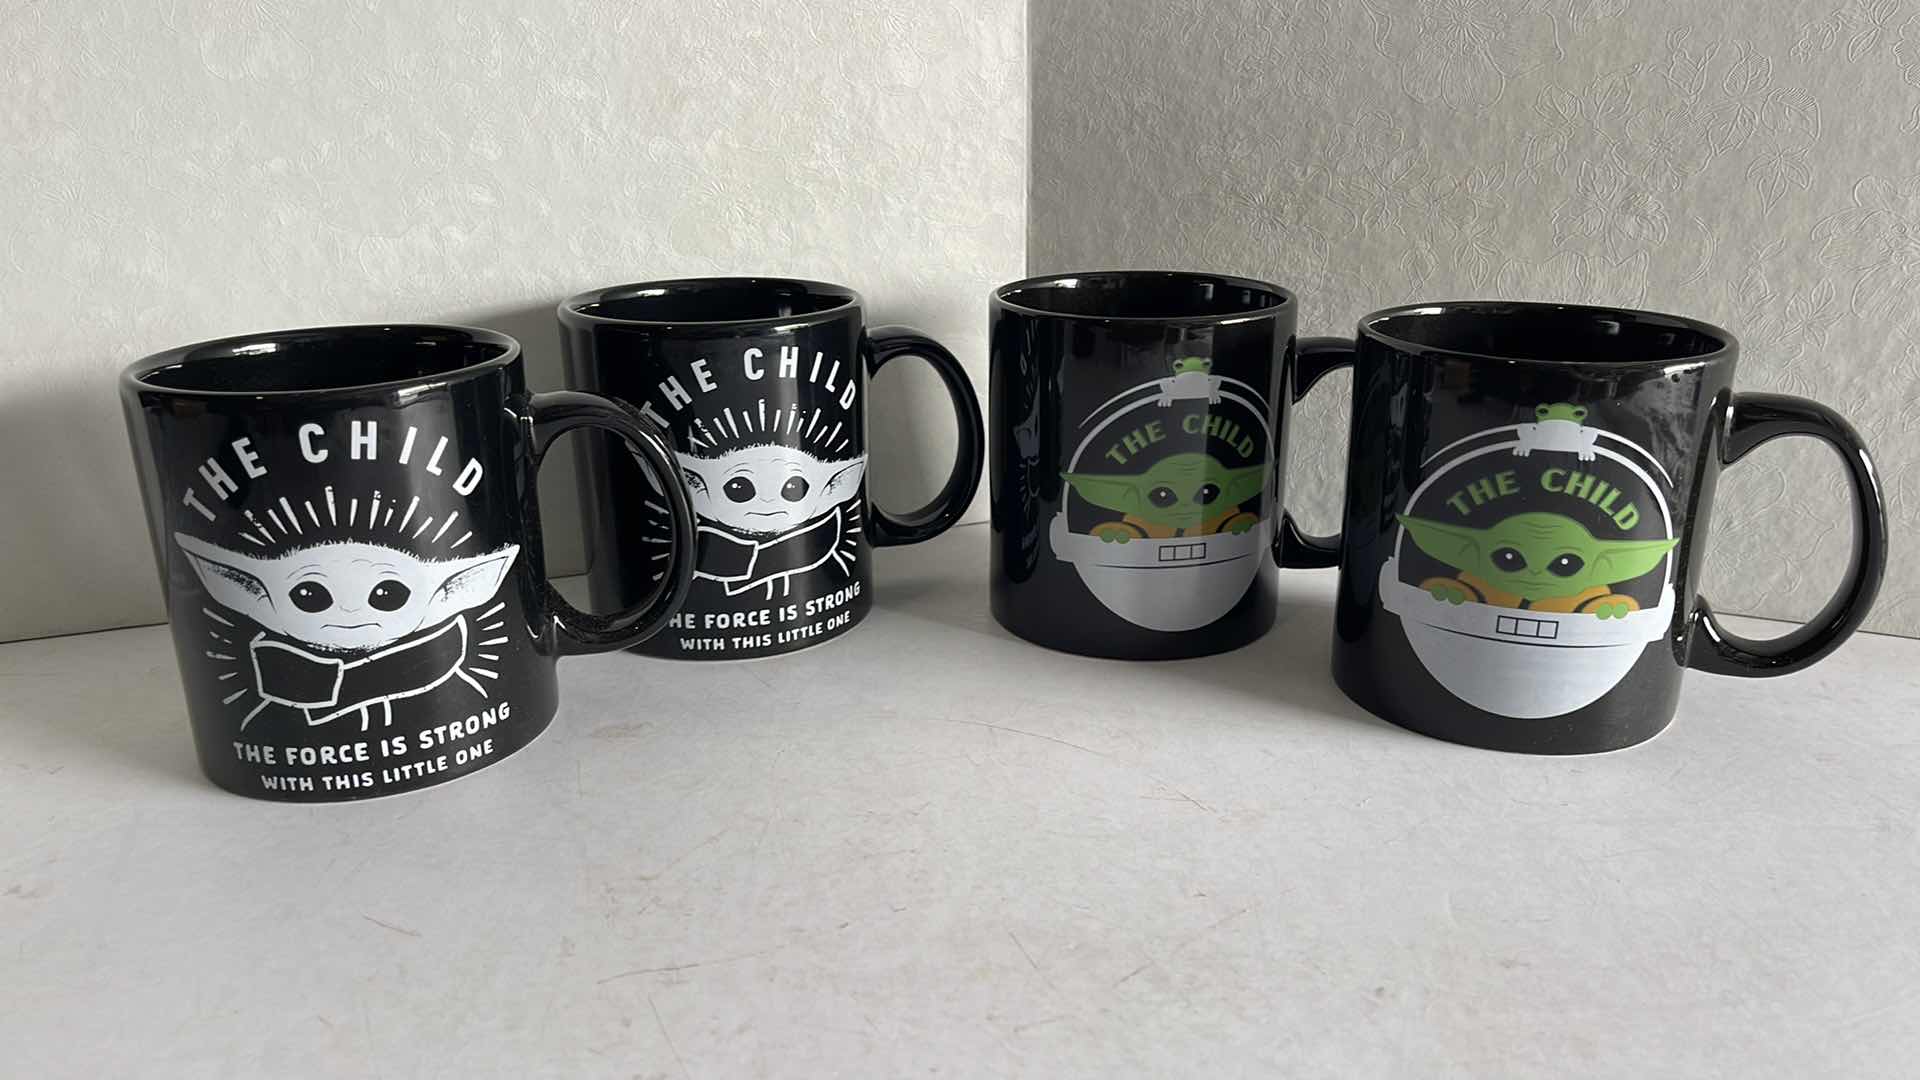 Photo 1 of STAR WARS THE MANDALORIAN THE CHILD COFFEE MUGS SET OF (4) MSRP $49.99